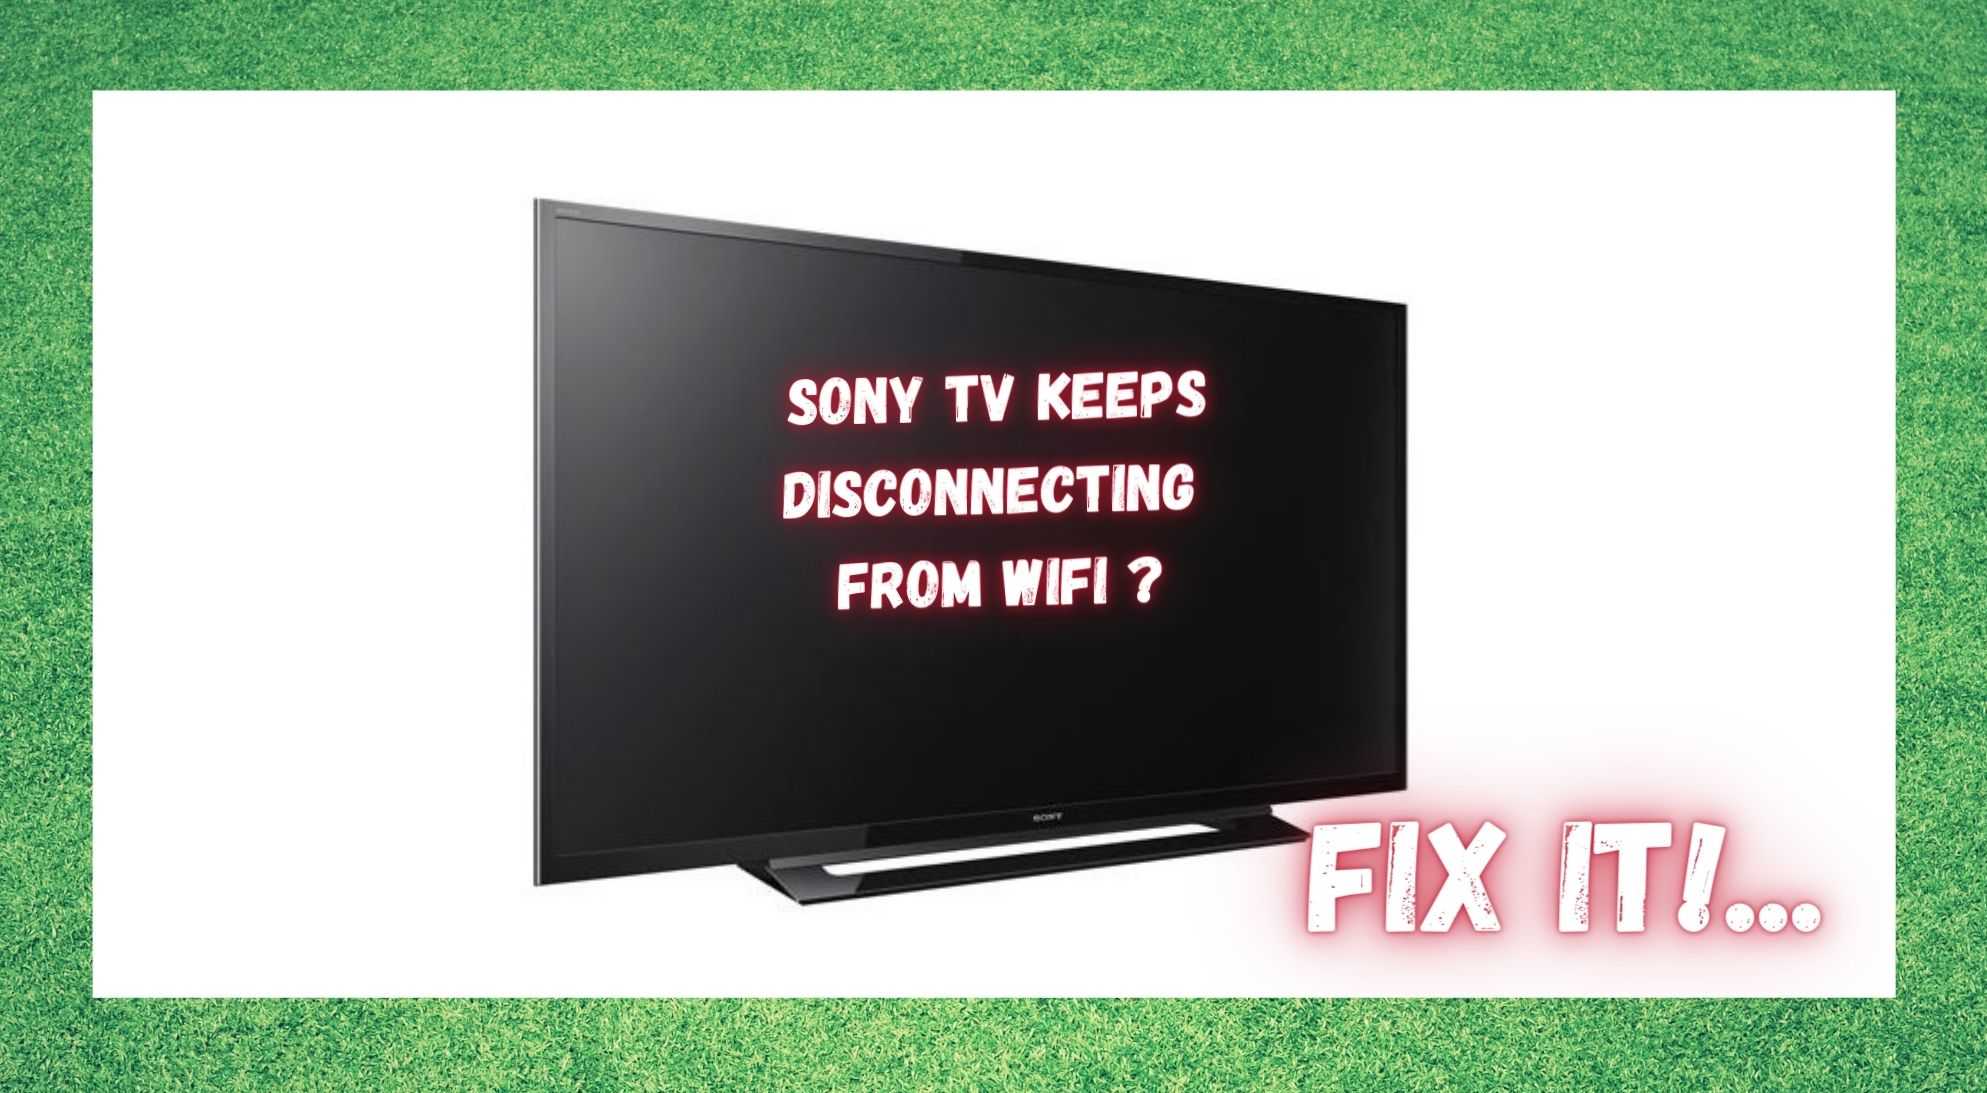 Sony TV keeps disconnecting from WiFi